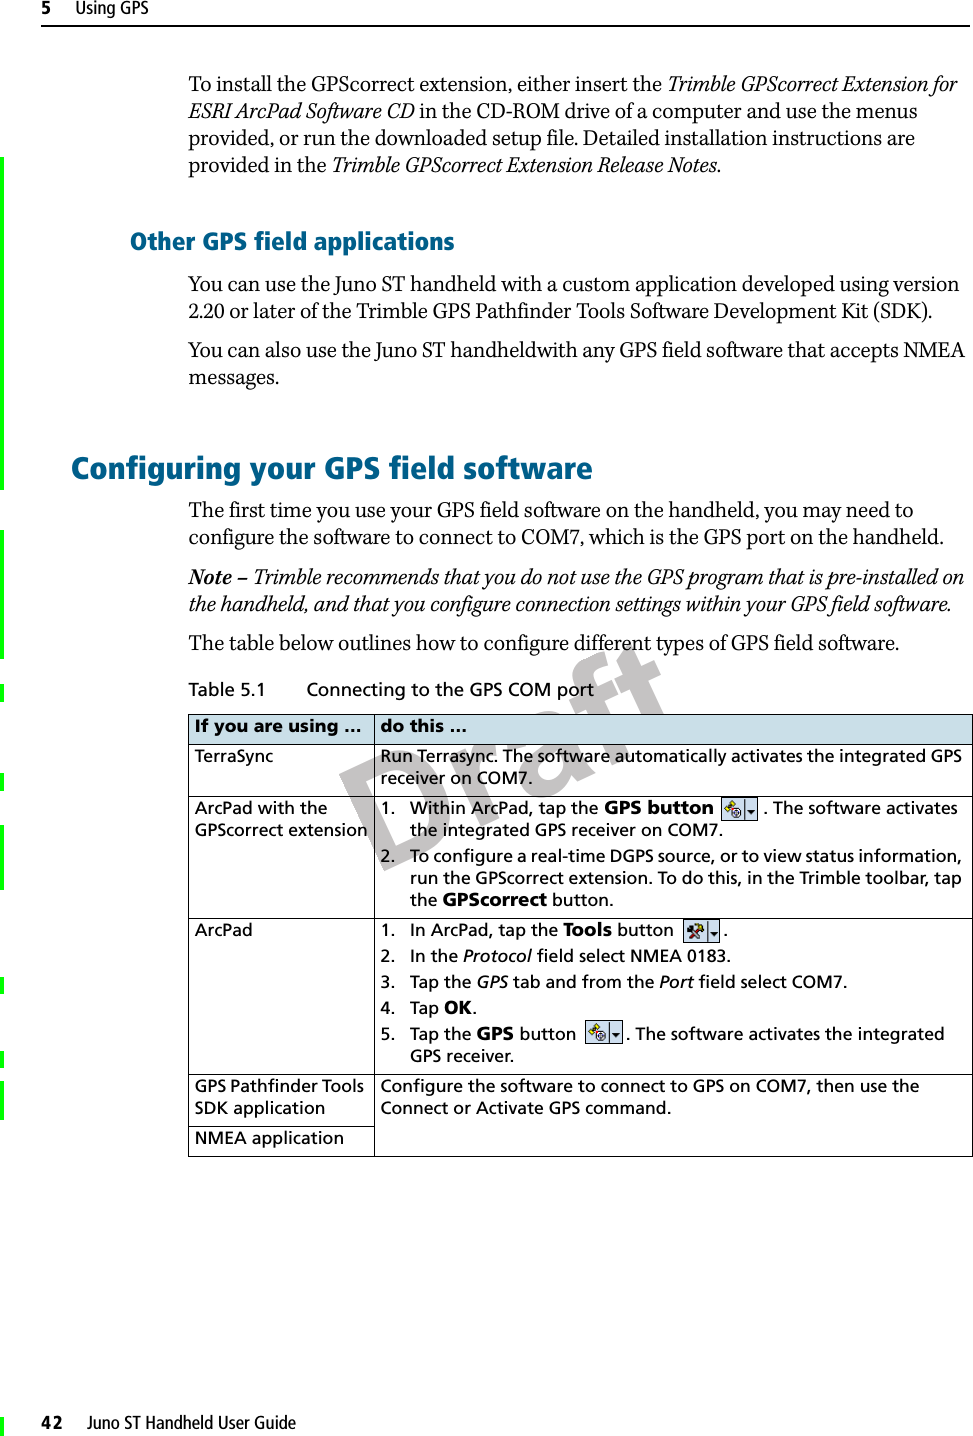 Draft5     Using GPS42     Juno ST Handheld User GuideTo install the GPScorrect extension, either insert the Trimble GPScorrect Extension for ESRI ArcPad Software CD in the CD-ROM drive of a computer and use the menus provided, or run the downloaded setup file. Detailed installation instructions are provided in the Trimble GPScorrect Extension Release Notes.Other GPS field applicationsYou can use the Juno ST handheld with a custom application developed using version 2.20 or later of the Trimble GPS Pathfinder Tools Software Development Kit (SDK).You can also use the Juno ST handheldwith any GPS field software that accepts NMEA messages.Configuring your GPS field softwareThe first time you use your GPS field software on the handheld, you may need to configure the software to connect to COM7, which is the GPS port on the handheld.Note – Trimble recommends that you do not use the GPS program that is pre-installed on the handheld, and that you configure connection settings within your GPS field software.The table below outlines how to configure different types of GPS field software.Table 5.1 Connecting to the GPS COM portIf you are using … do this …TerraSync Run Terrasync. The software automatically activates the integrated GPS receiver on COM7.ArcPad with the GPScorrect extension1. Within ArcPad, tap the GPS button  . The software activates the integrated GPS receiver on COM7.2. To configure a real-time DGPS source, or to view status information, run the GPScorrect extension. To do this, in the Trimble toolbar, tap the GPScorrect button.ArcPad 1. In ArcPad, tap the Tools button  .2. In the Protocol field select NMEA 0183.3. Tap the GPS tab and from the Port field select COM7.4. Tap OK.5. Tap the GPS button  . The software activates the integrated GPS receiver.GPS Pathfinder Tools SDK applicationConfigure the software to connect to GPS on COM7, then use the Connect or Activate GPS command.NMEA application